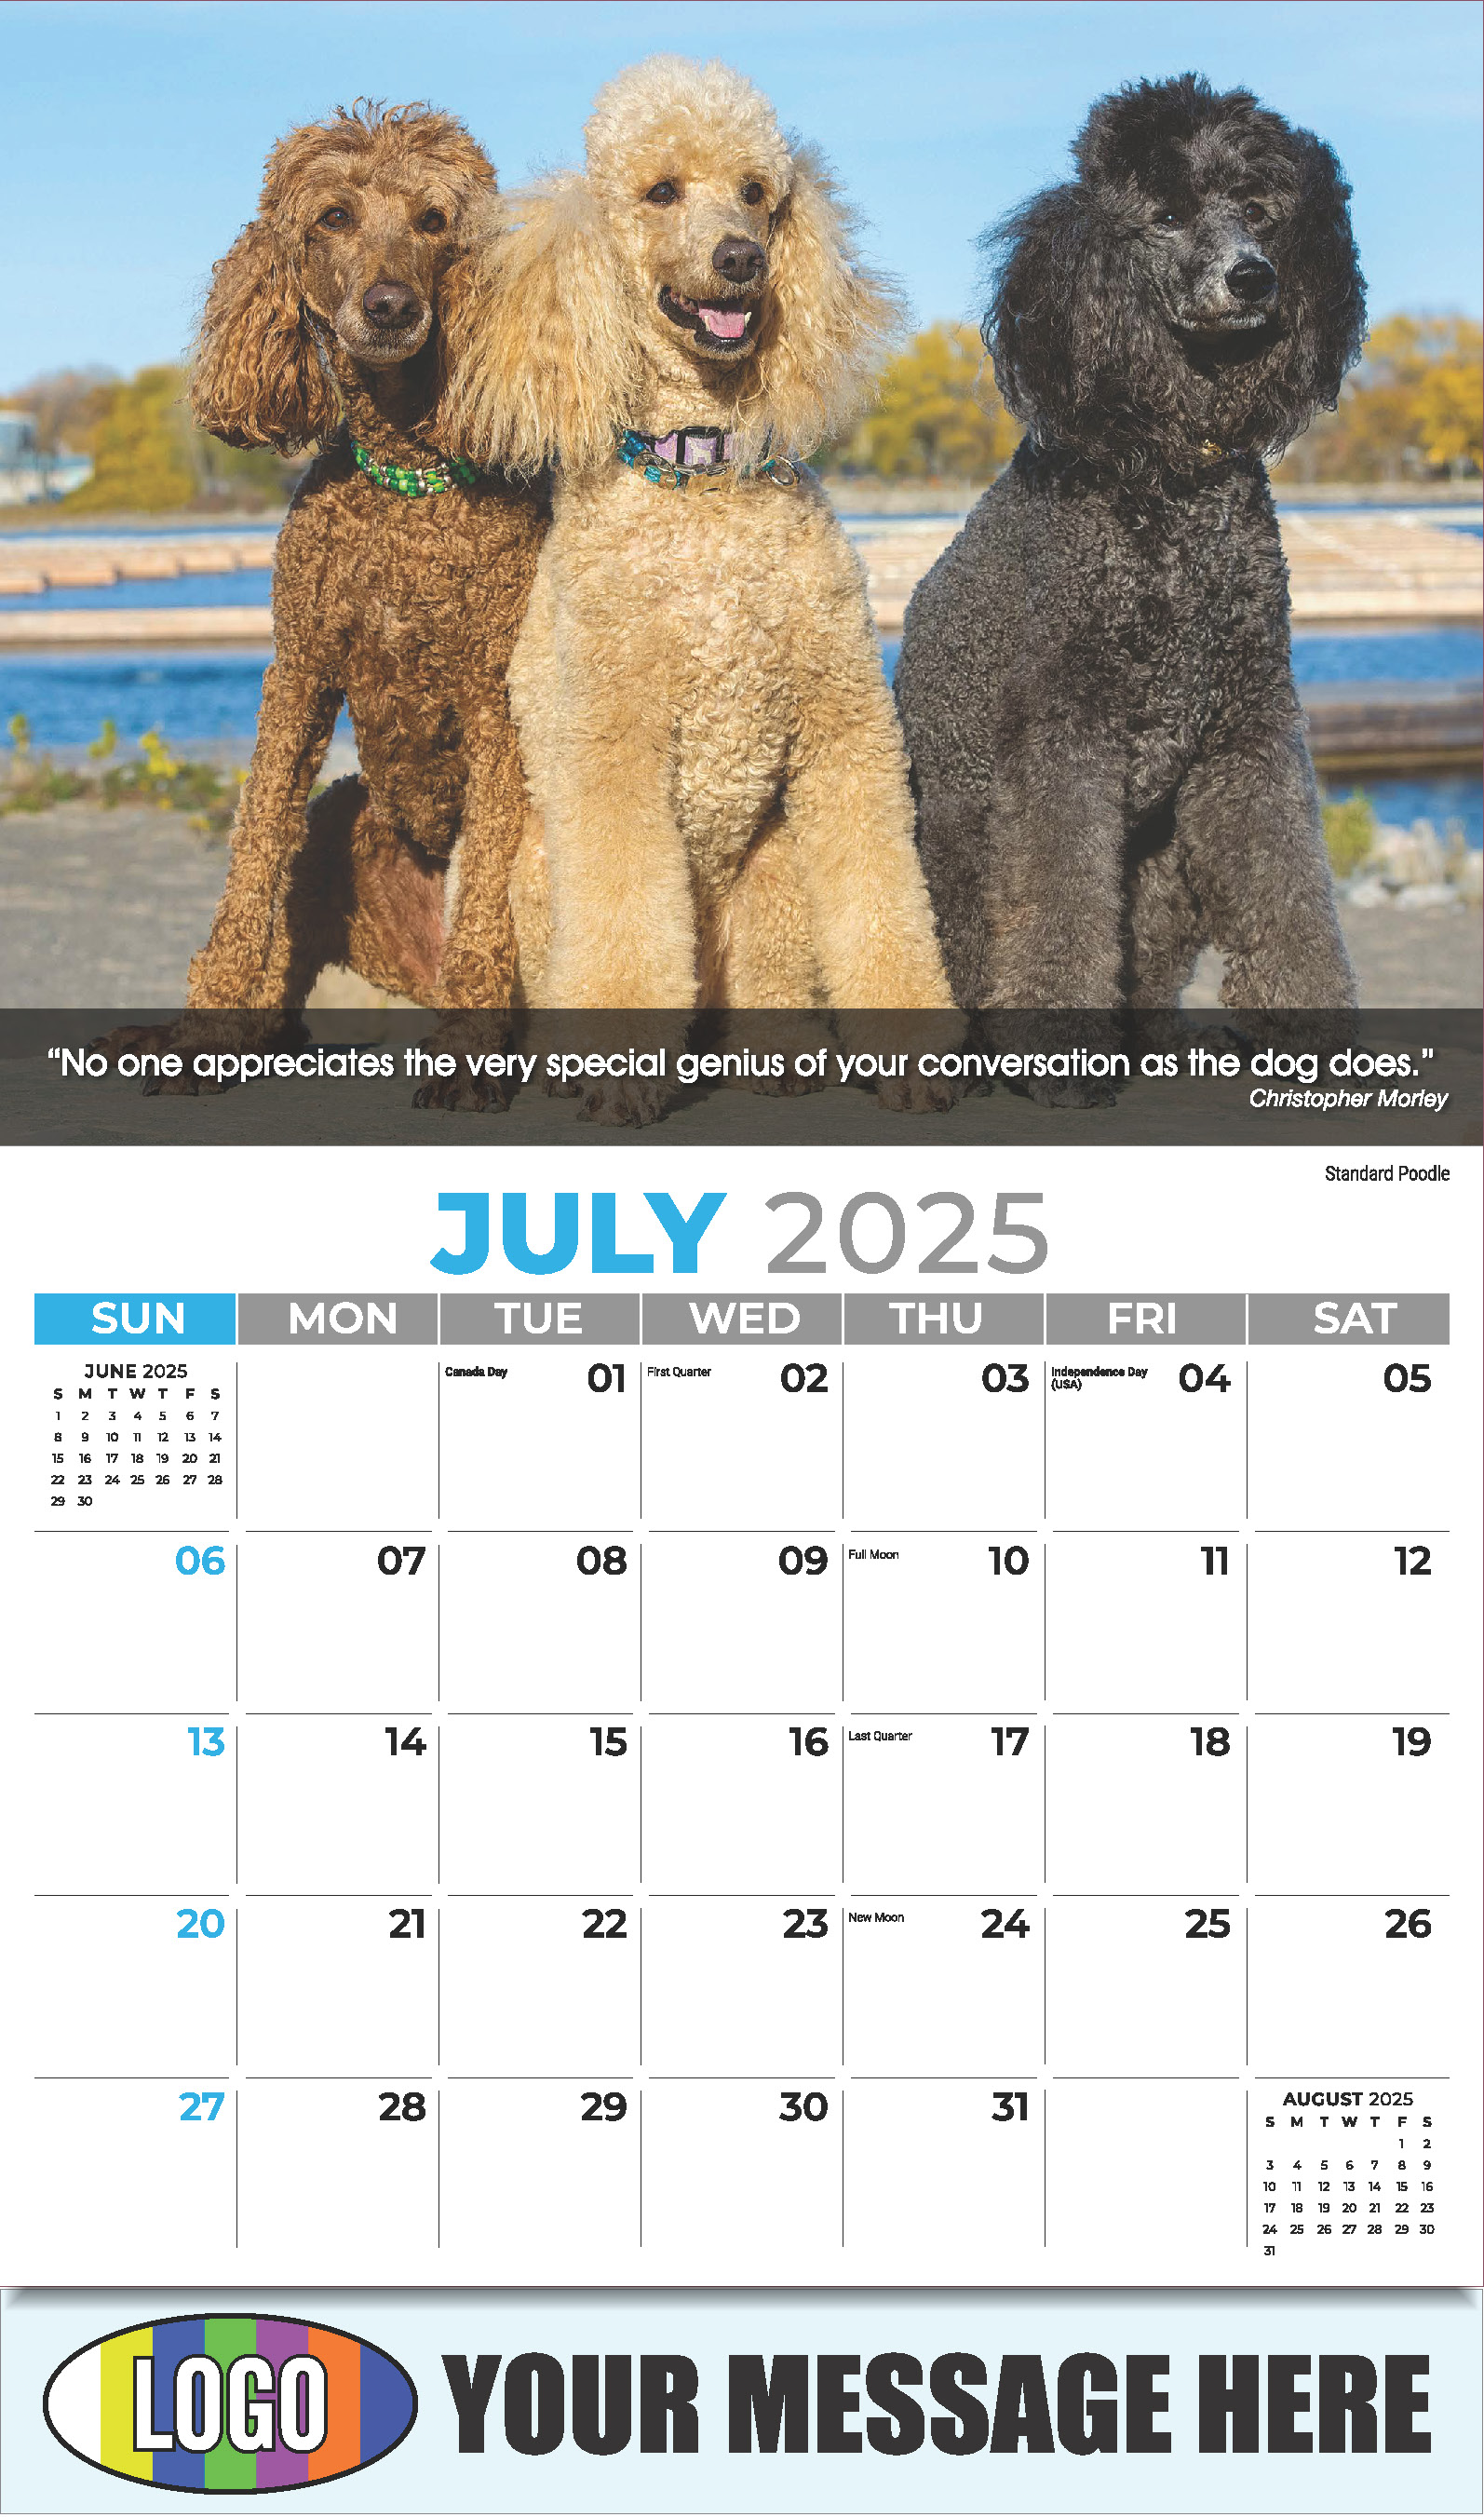 Dogs 2025 Vets and Pets Business Promotion Calendar - July